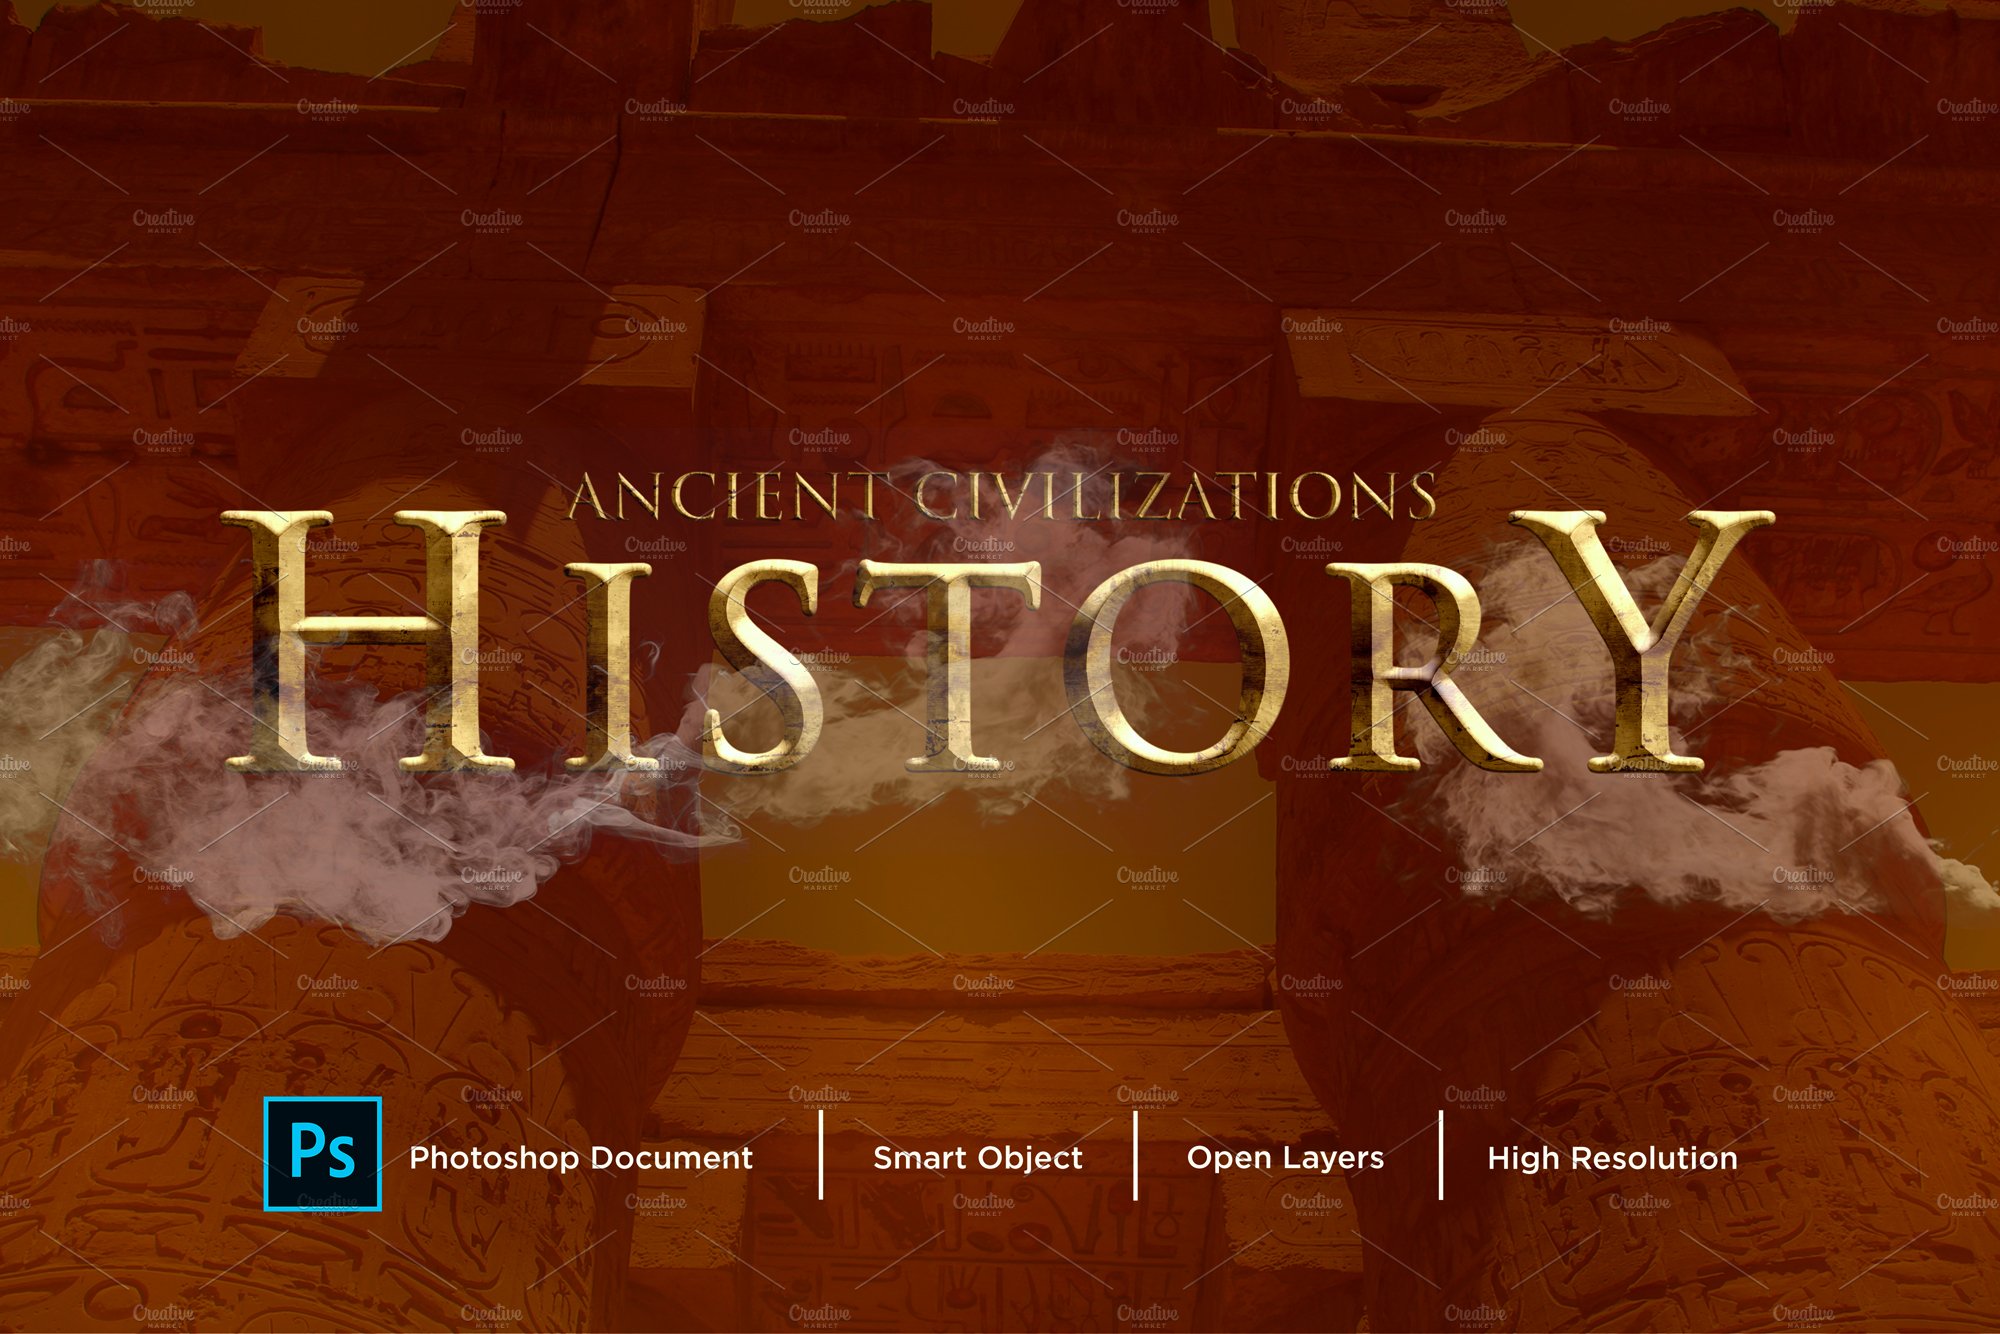 History Text Effect & Layer Stylecover image.